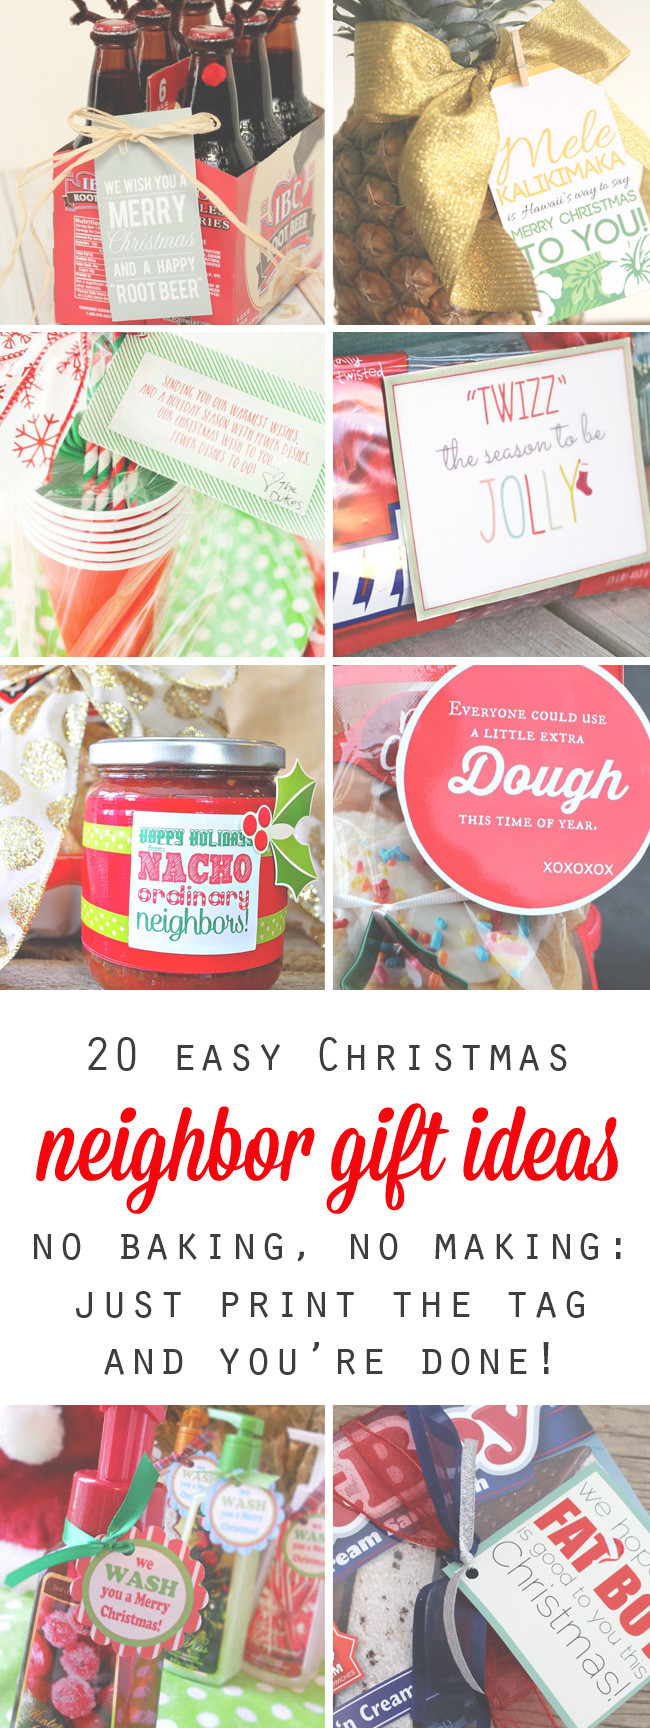 Free Christmas Gift Ideas
 20 quick easy and cheap neighbor t ideas for